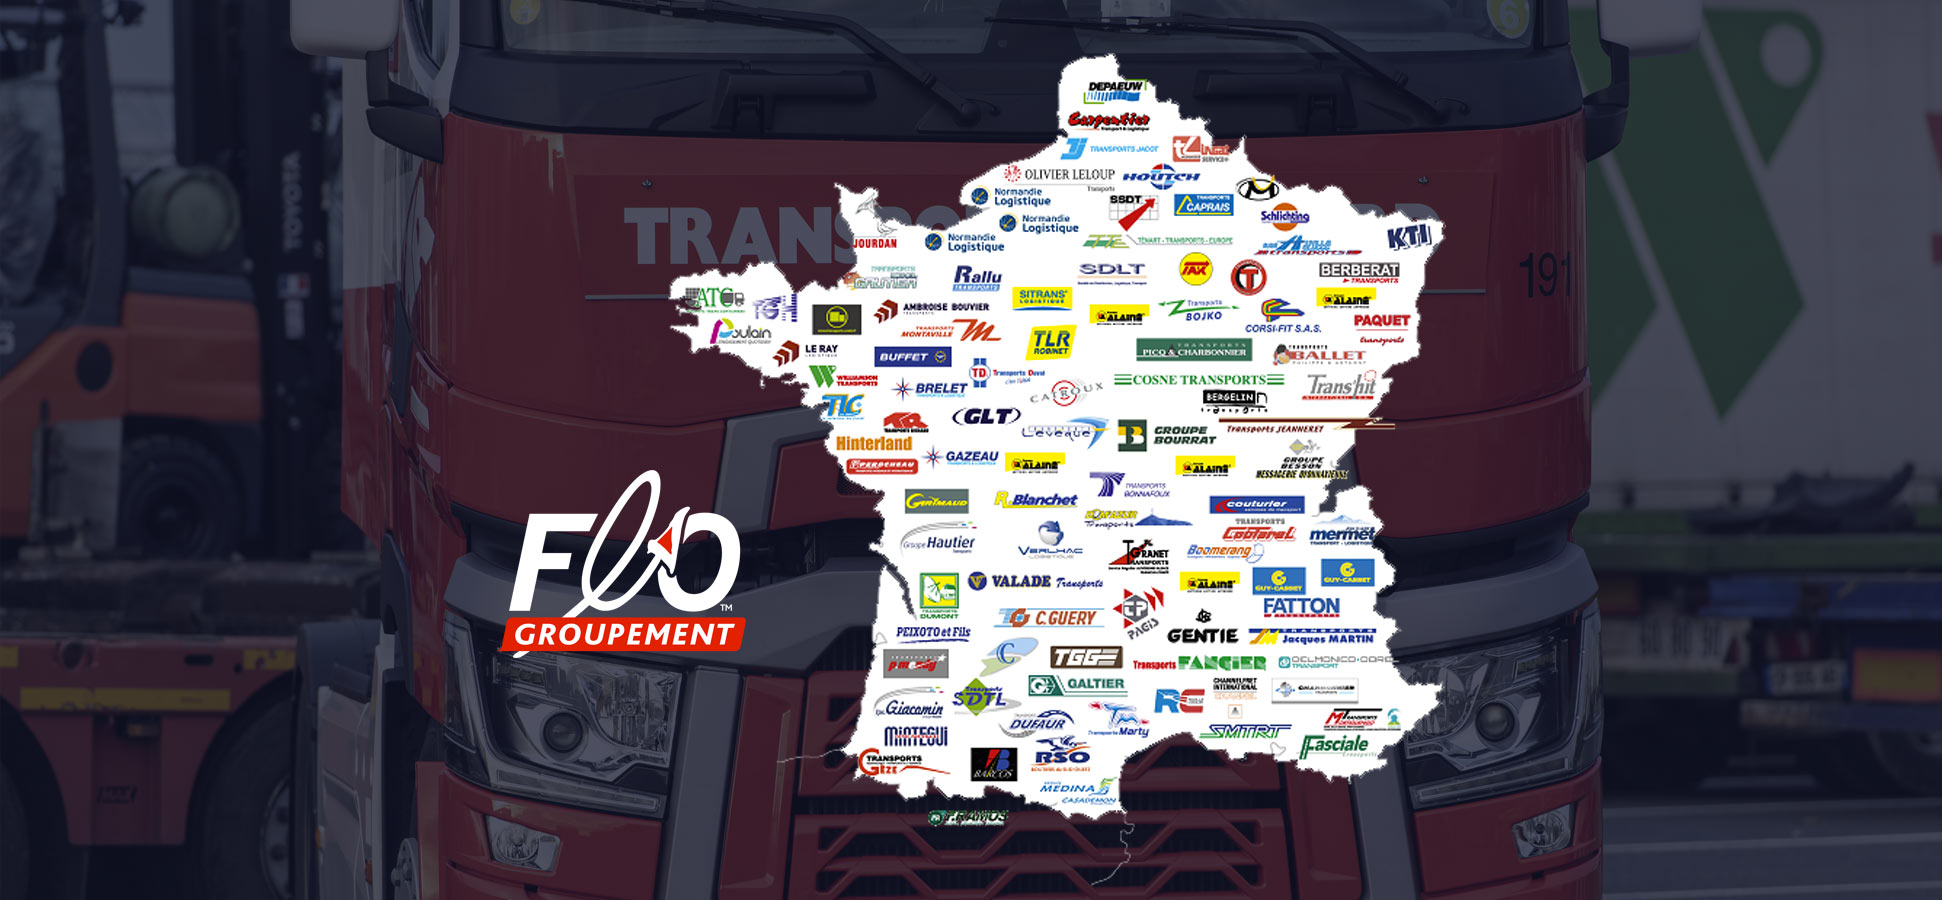 transports-routier-sarthe